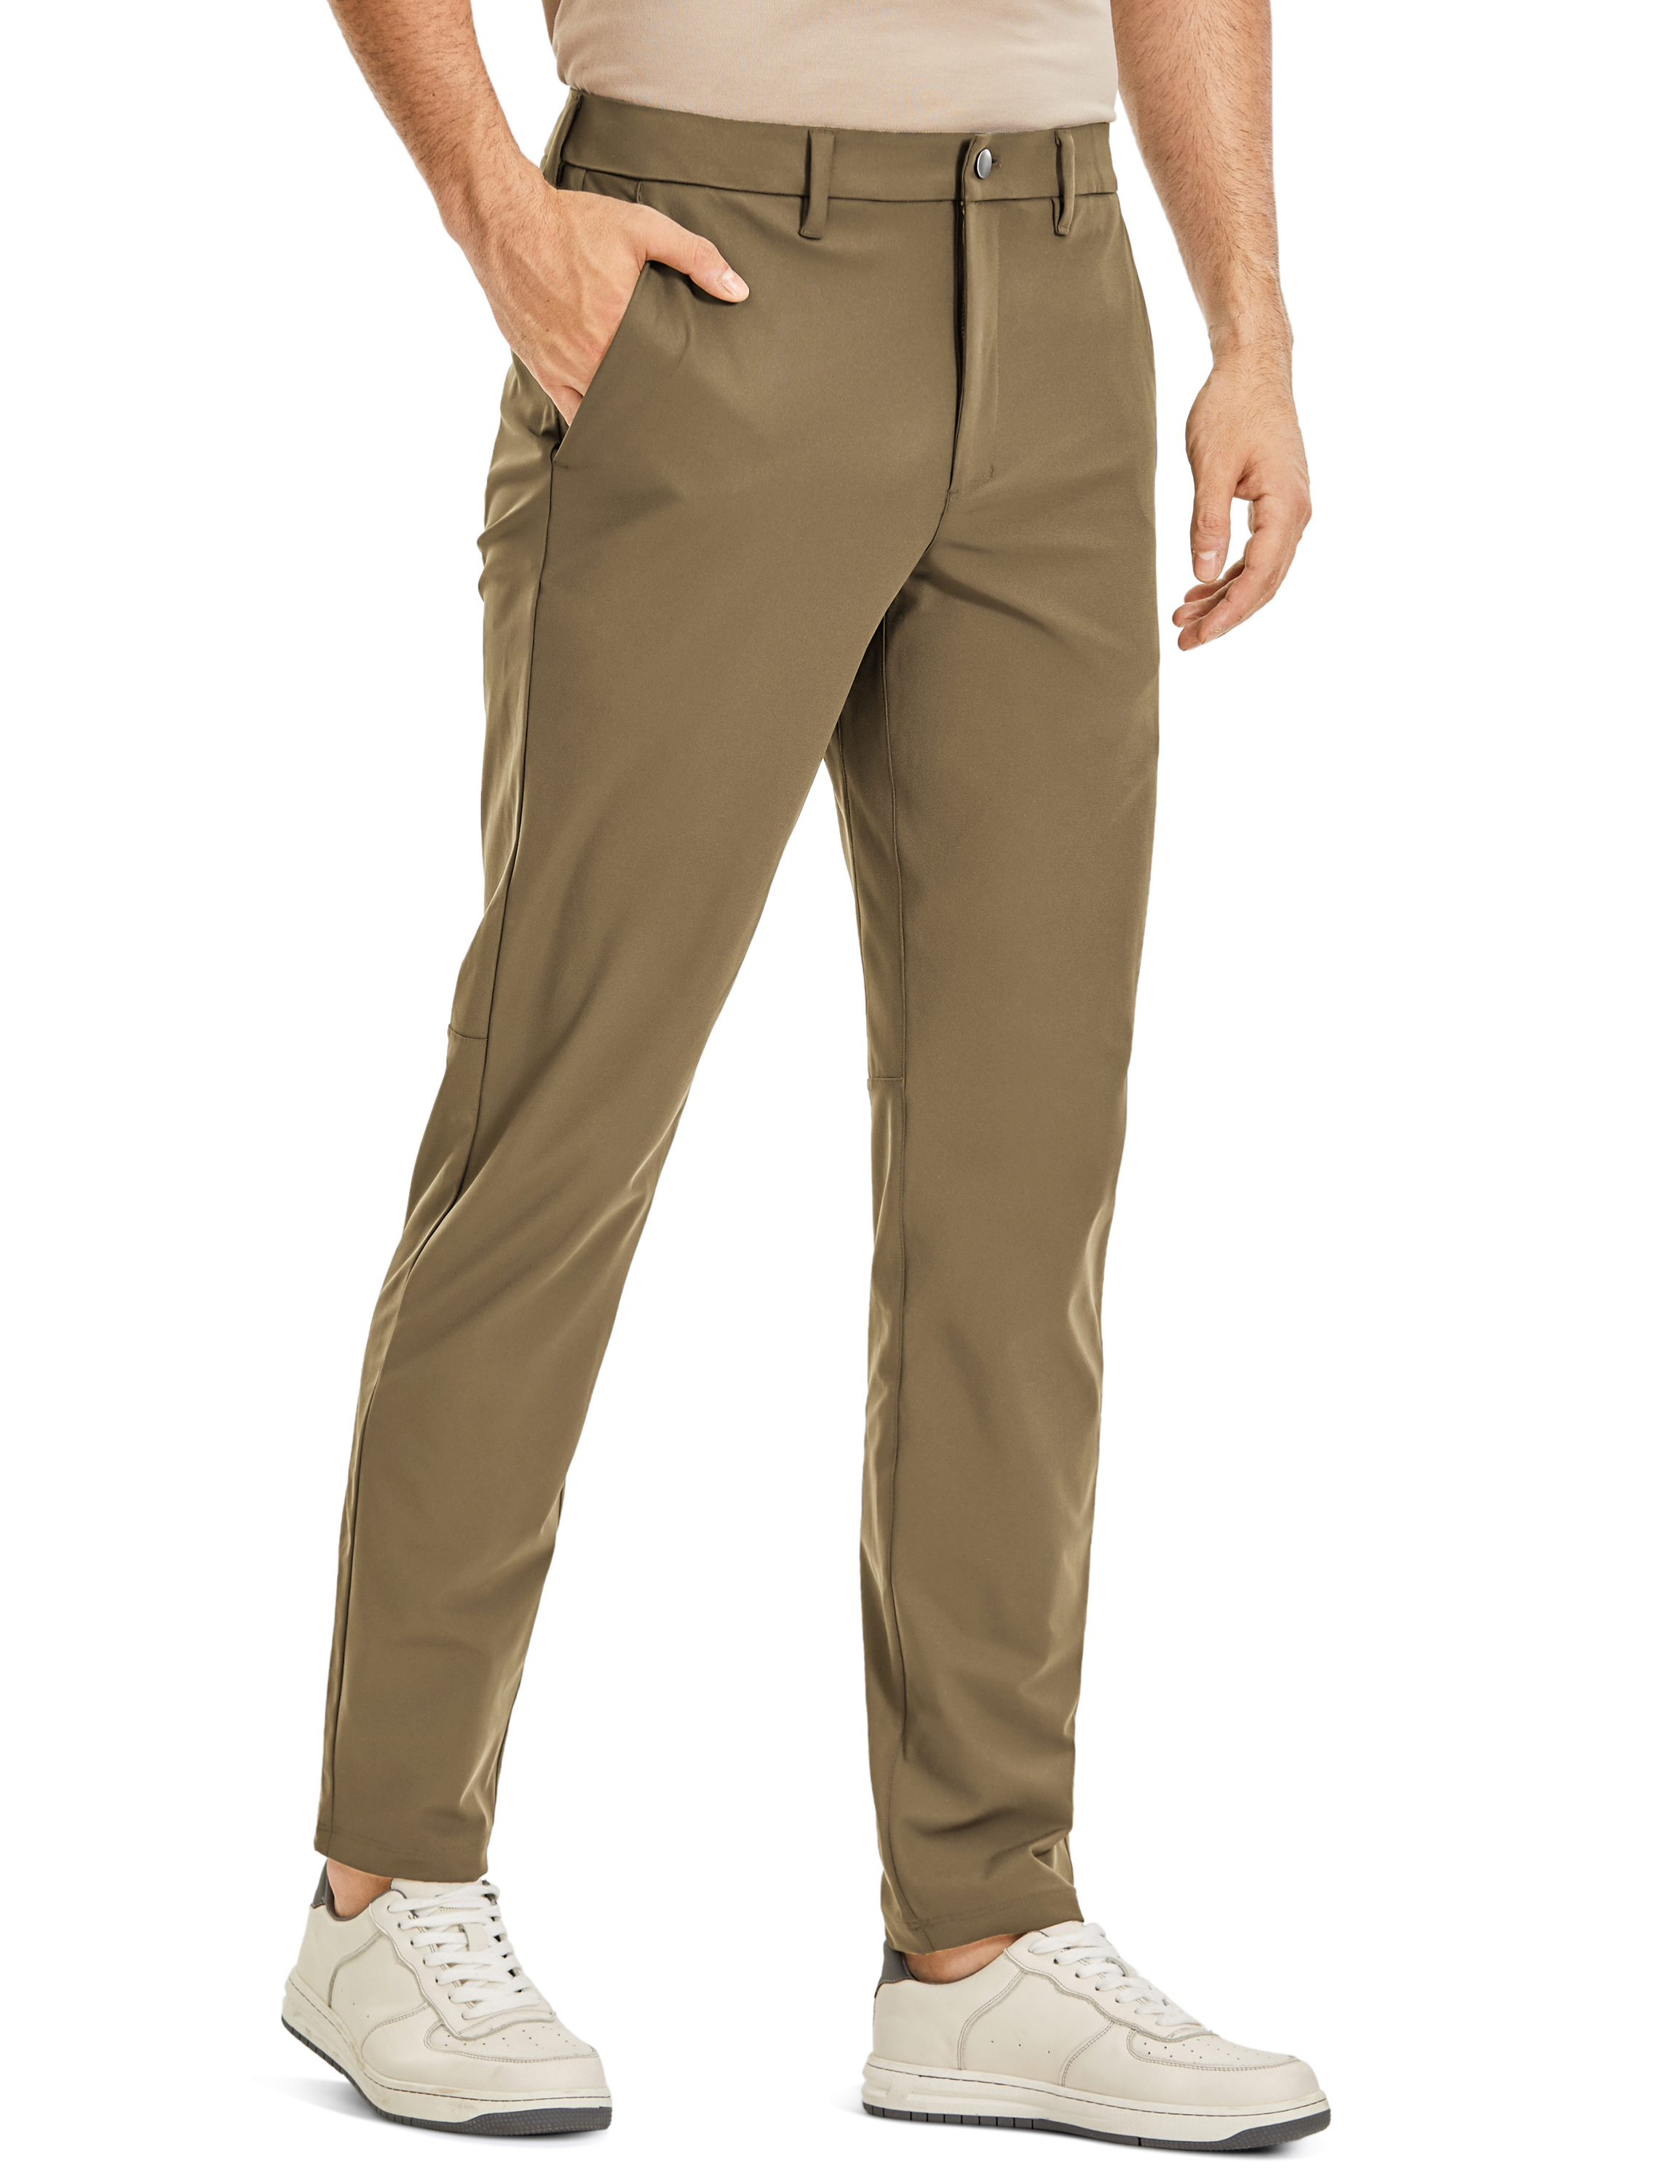 CRZ YOGA Men's Causul Relaxed Fit Lightweight Joggers Zip Pockets 29